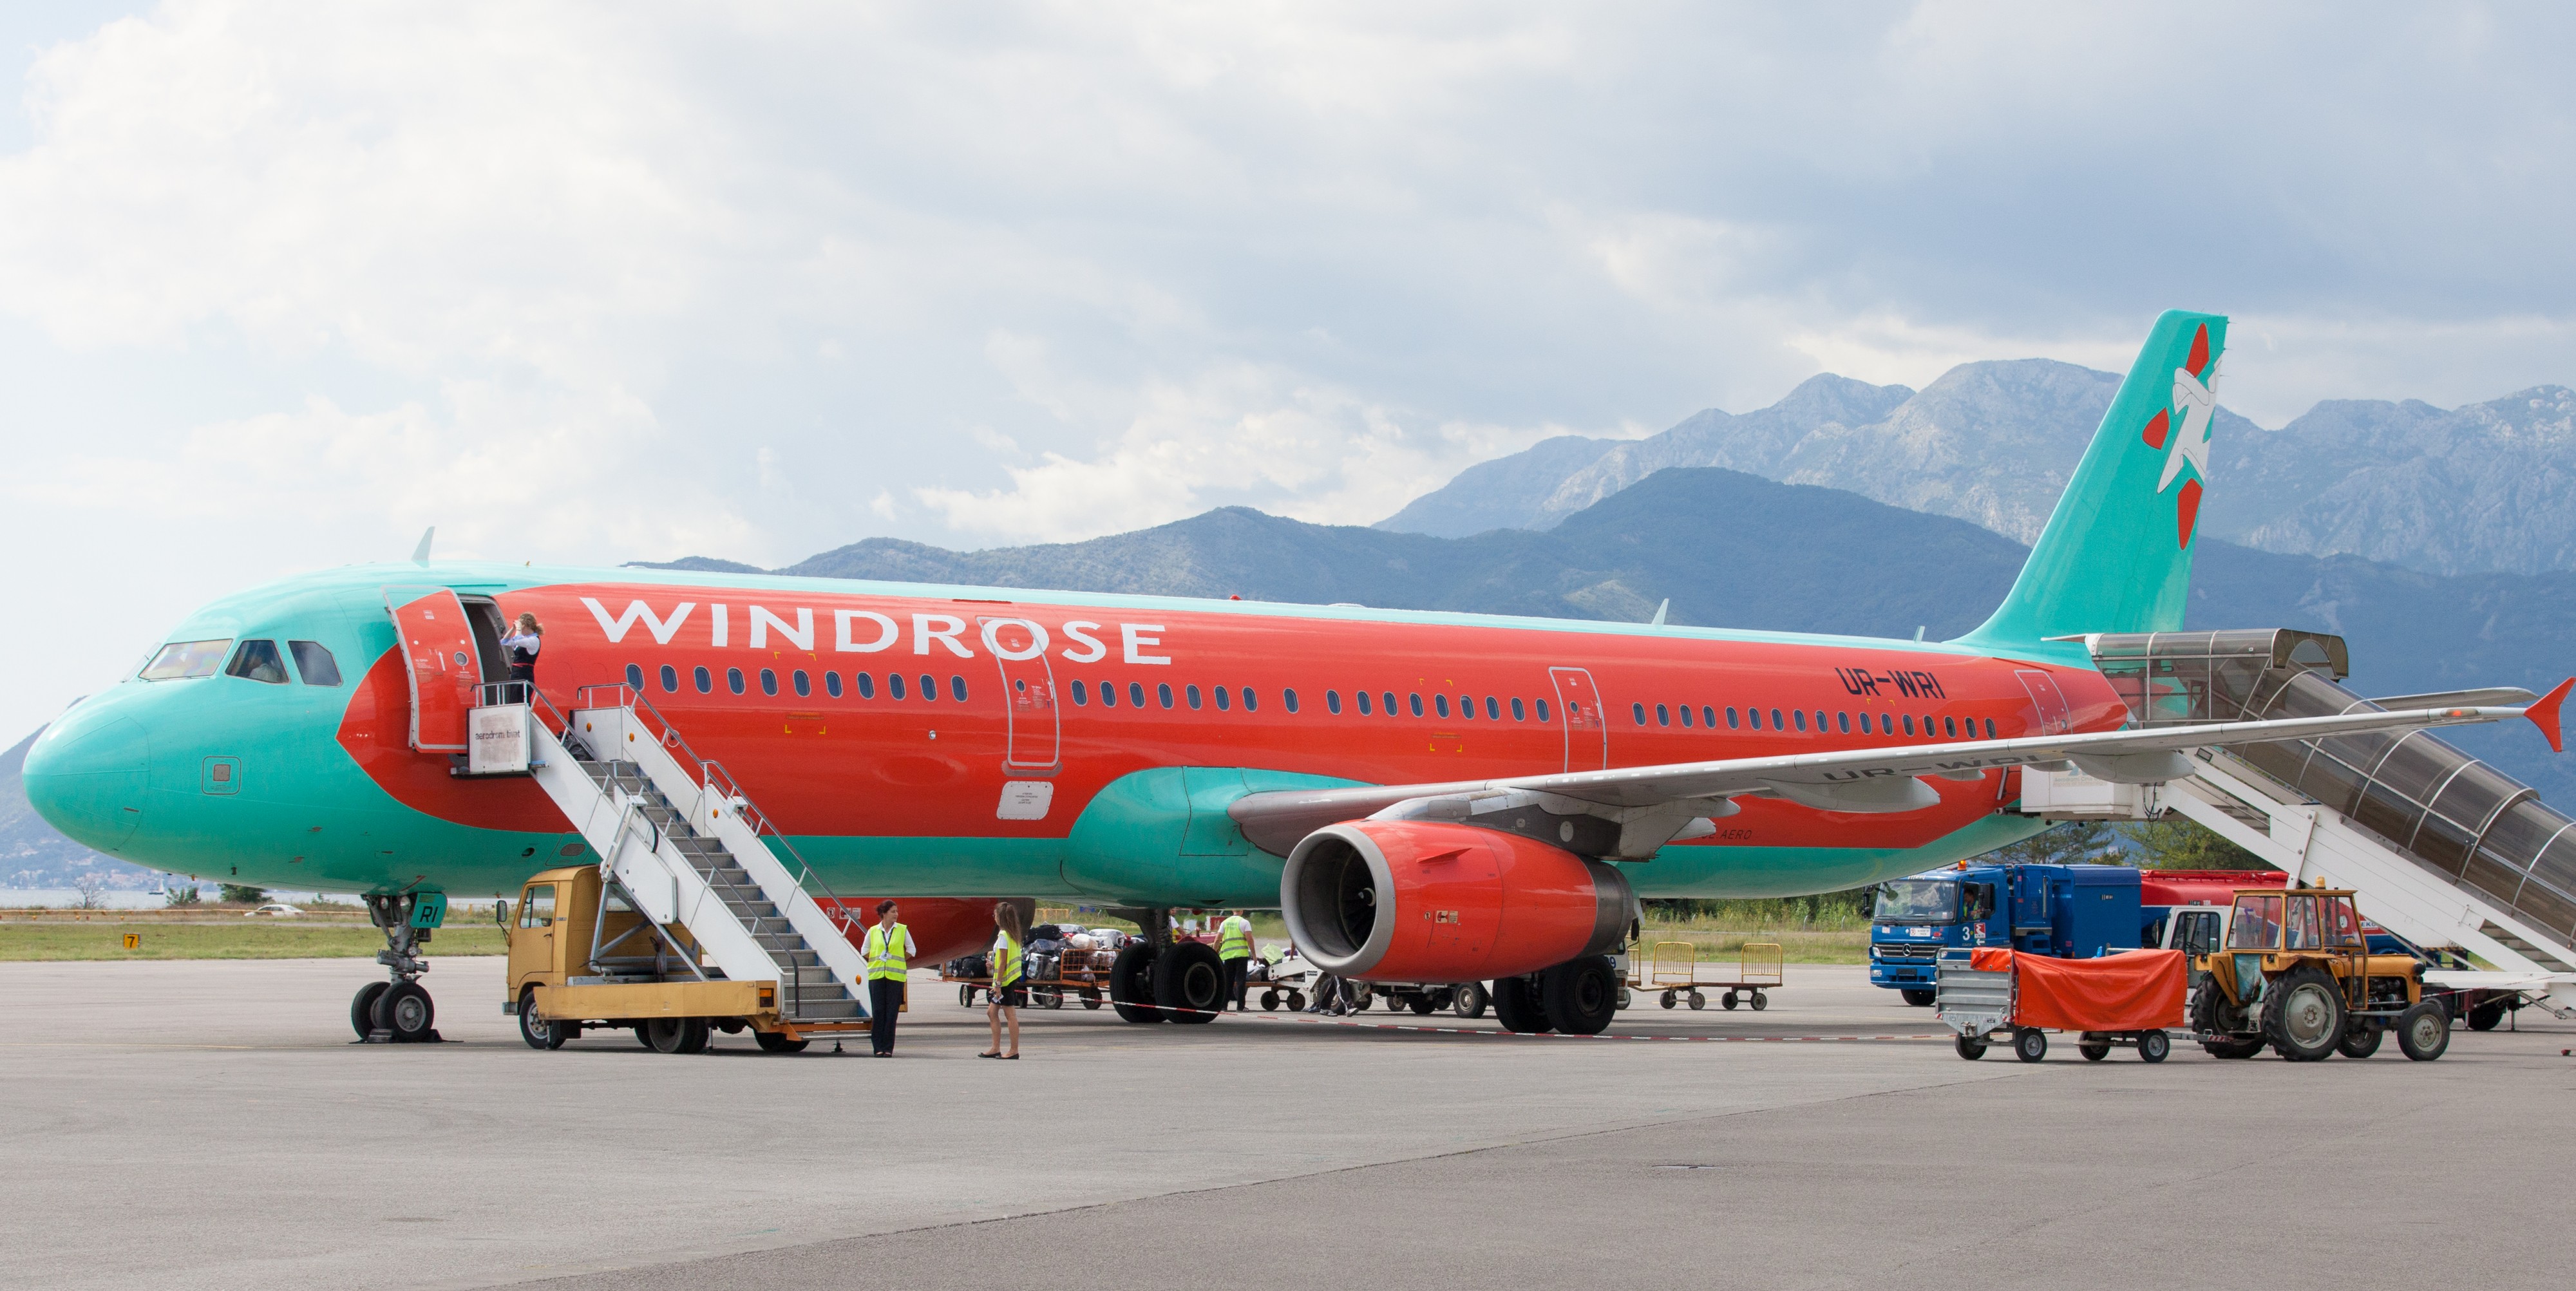 a Windrose airplane photographed in Tivat, Montenegro in August 2014, picture 1